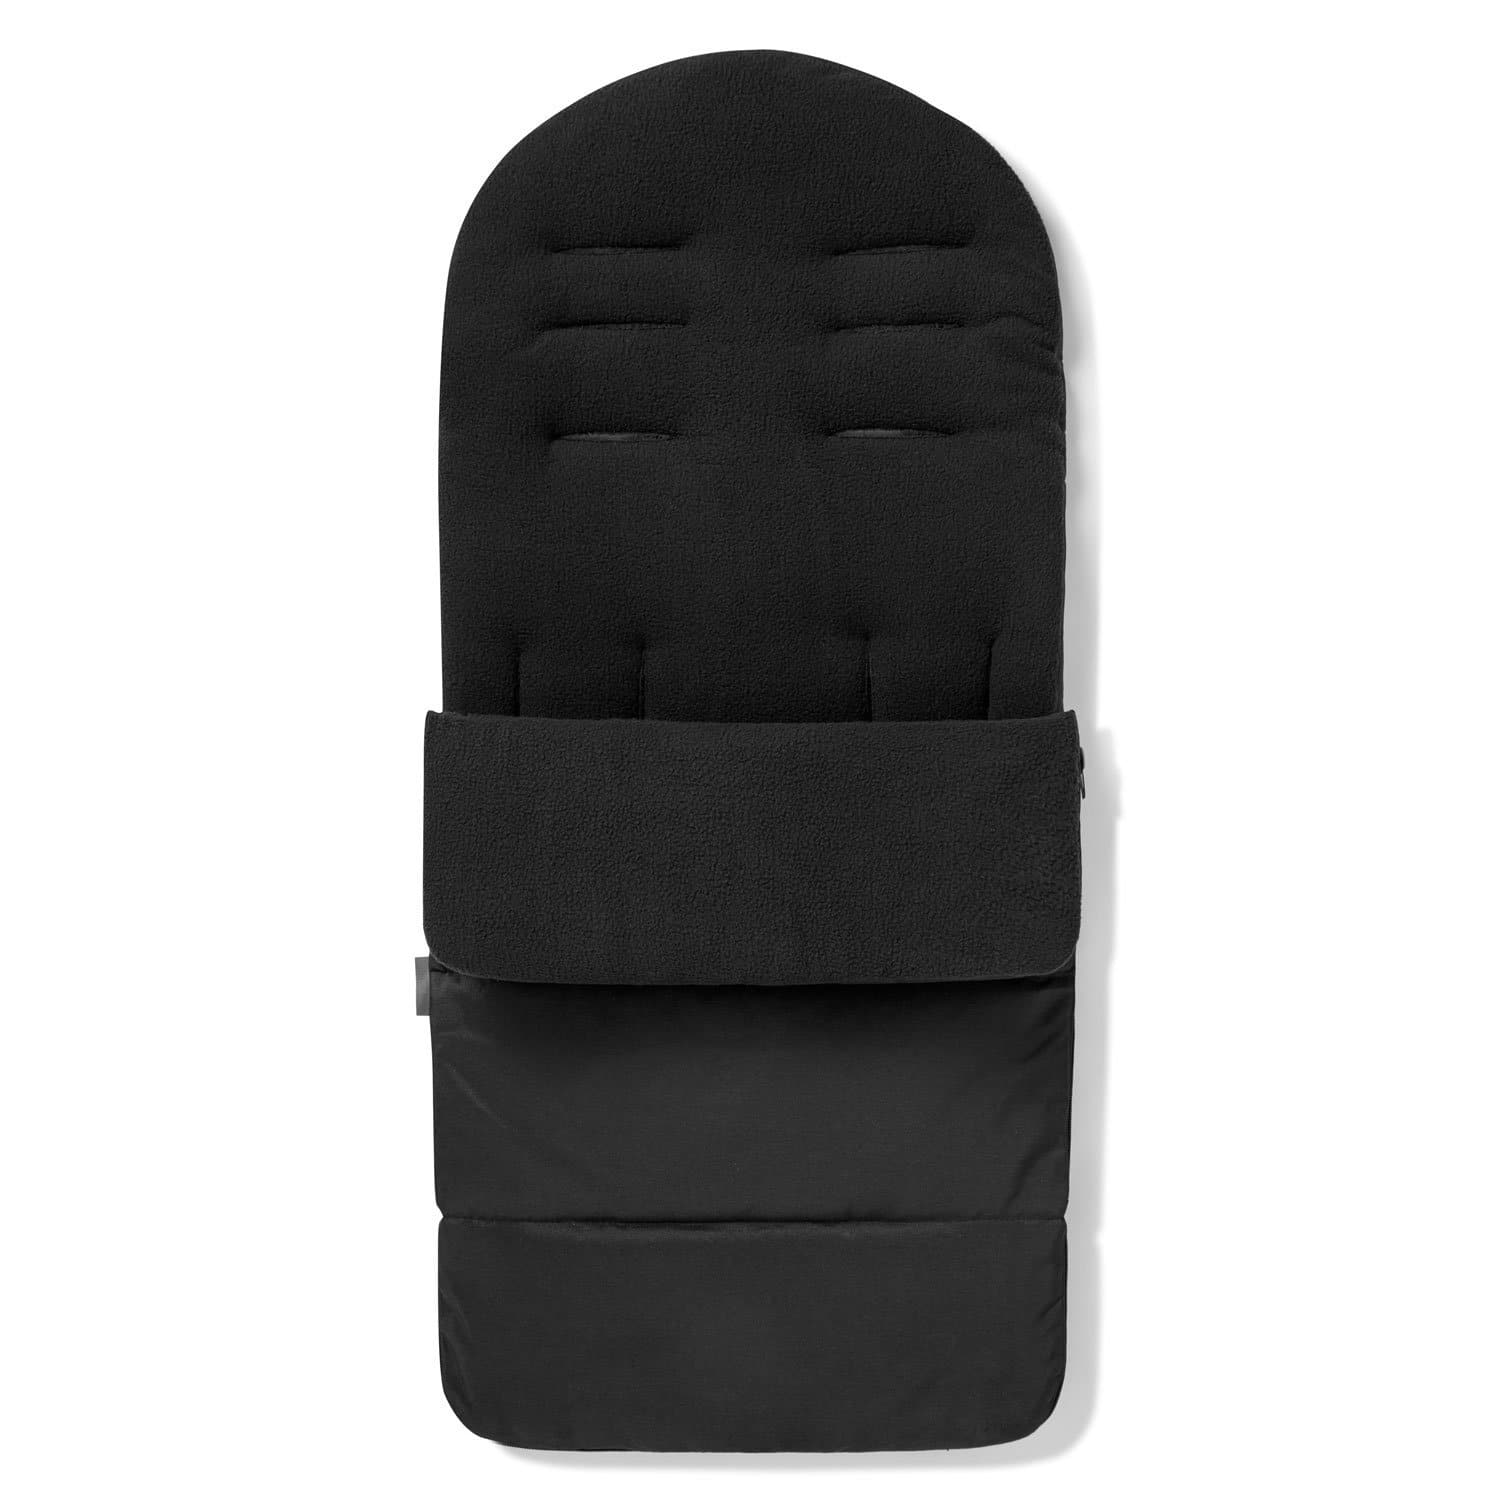 Premium Footmuff / Cosy Toes Compatible with Hartan - Black Jack / Fits All Models | For Your Little One